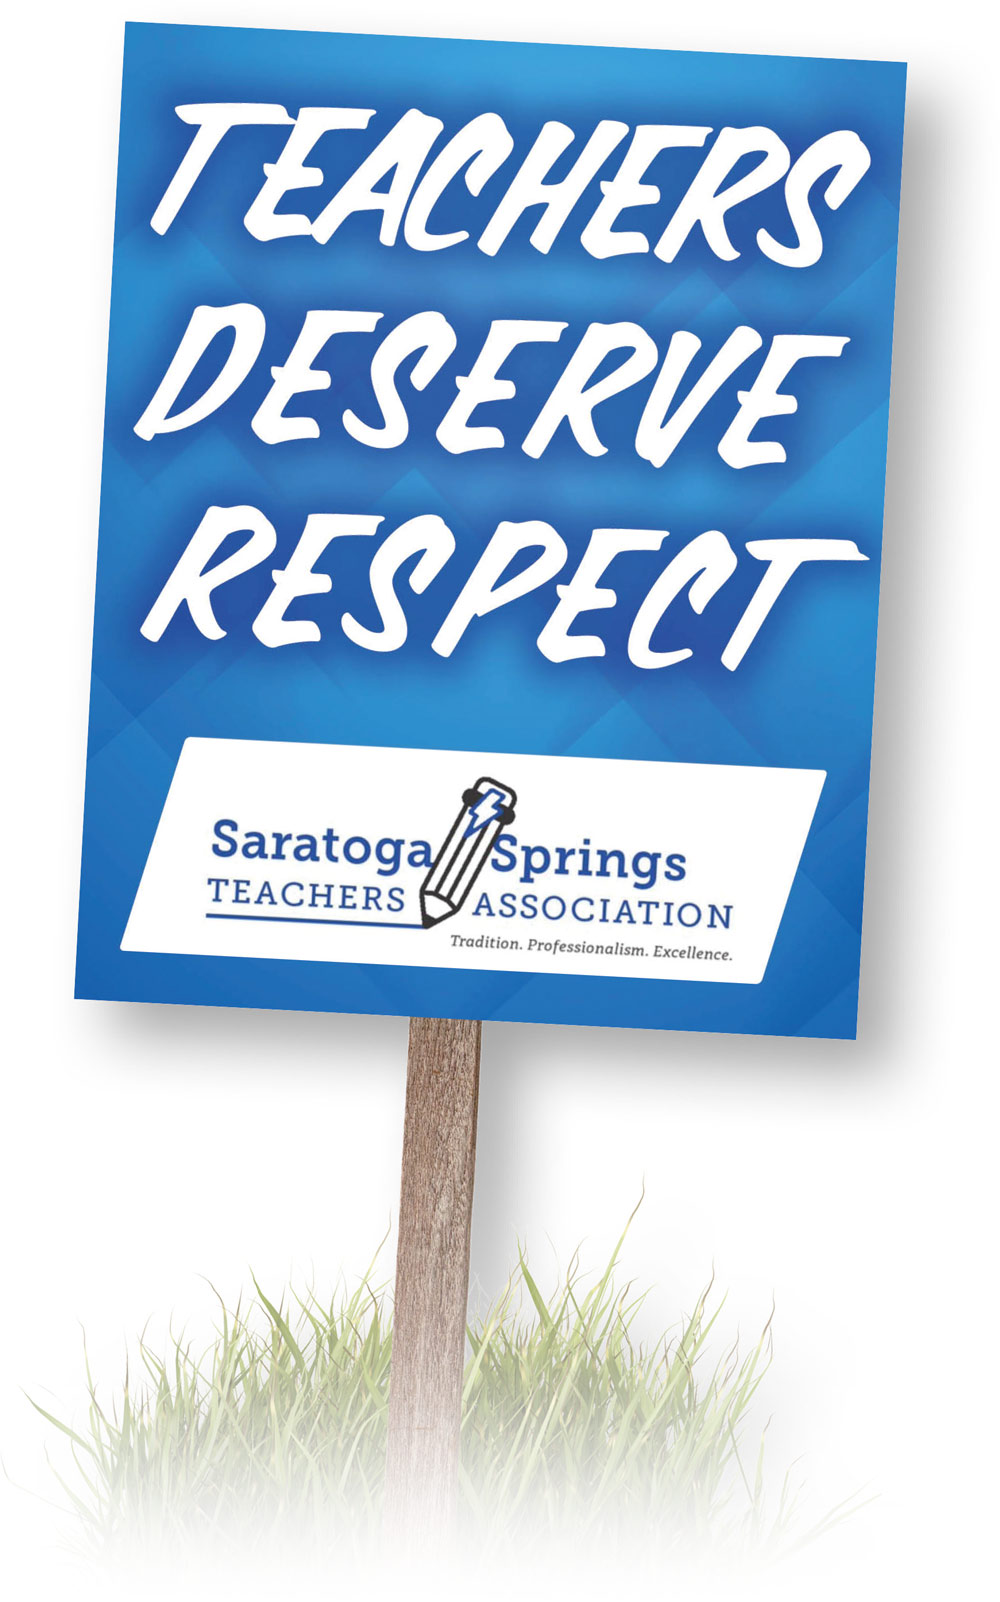 picket sign that reads Teachers Deserve Respect with the Saratoga Springs Teachers Association logo